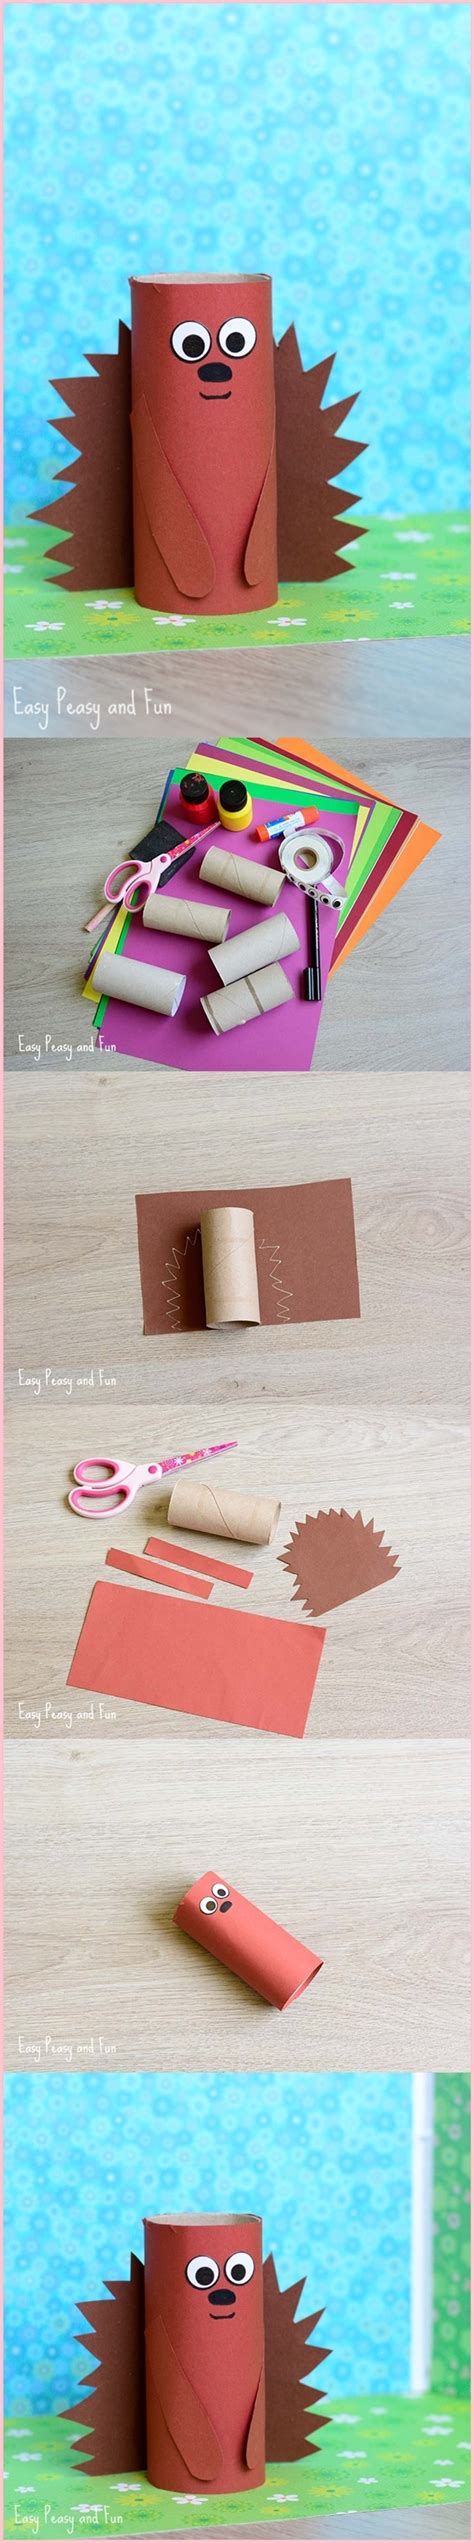 30 Fun Toilet Paper Roll Crafts Ideas For Kids To Make